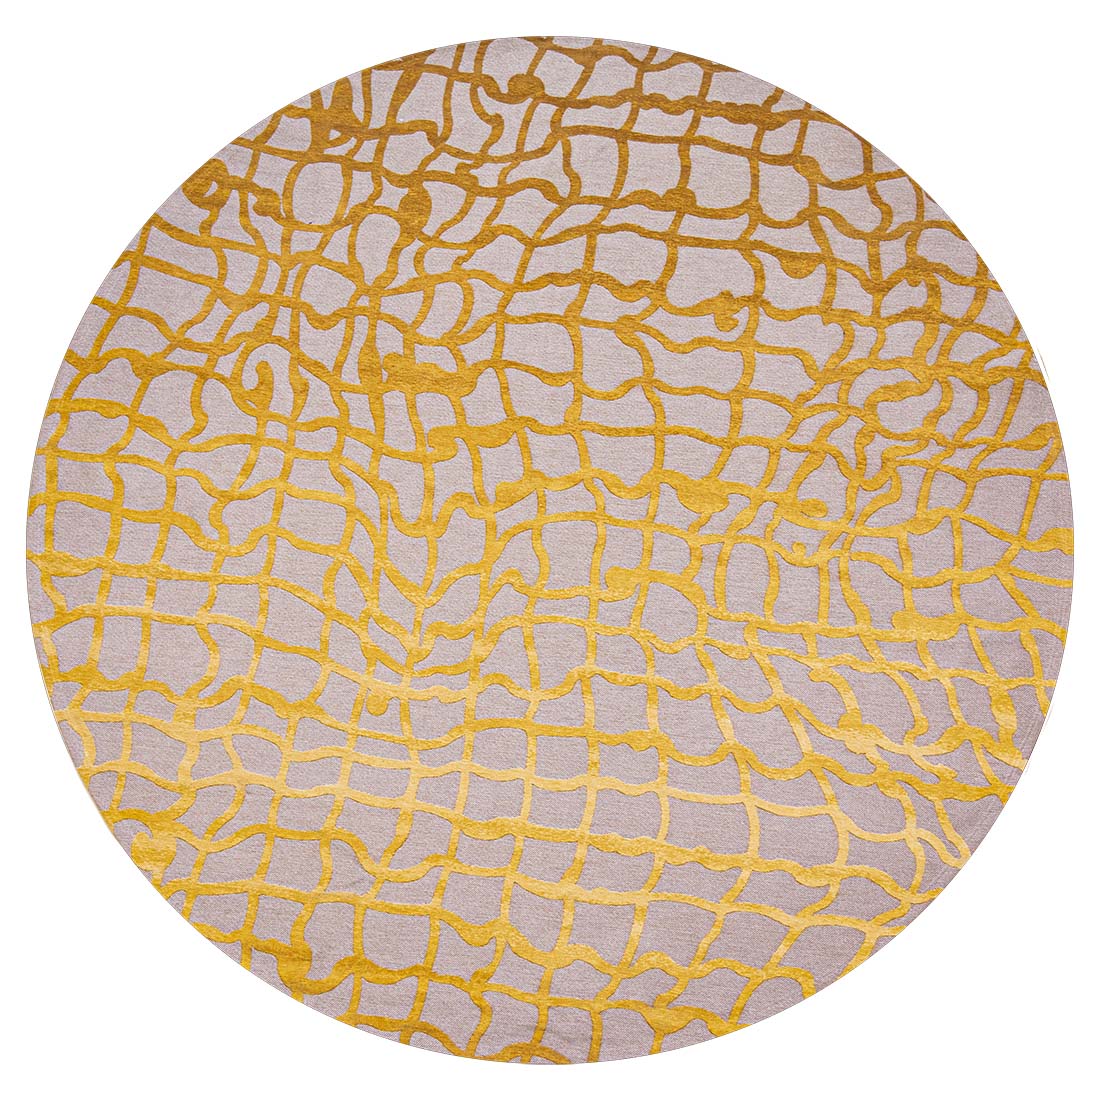 flatweave circle rug with abstract yellow design
